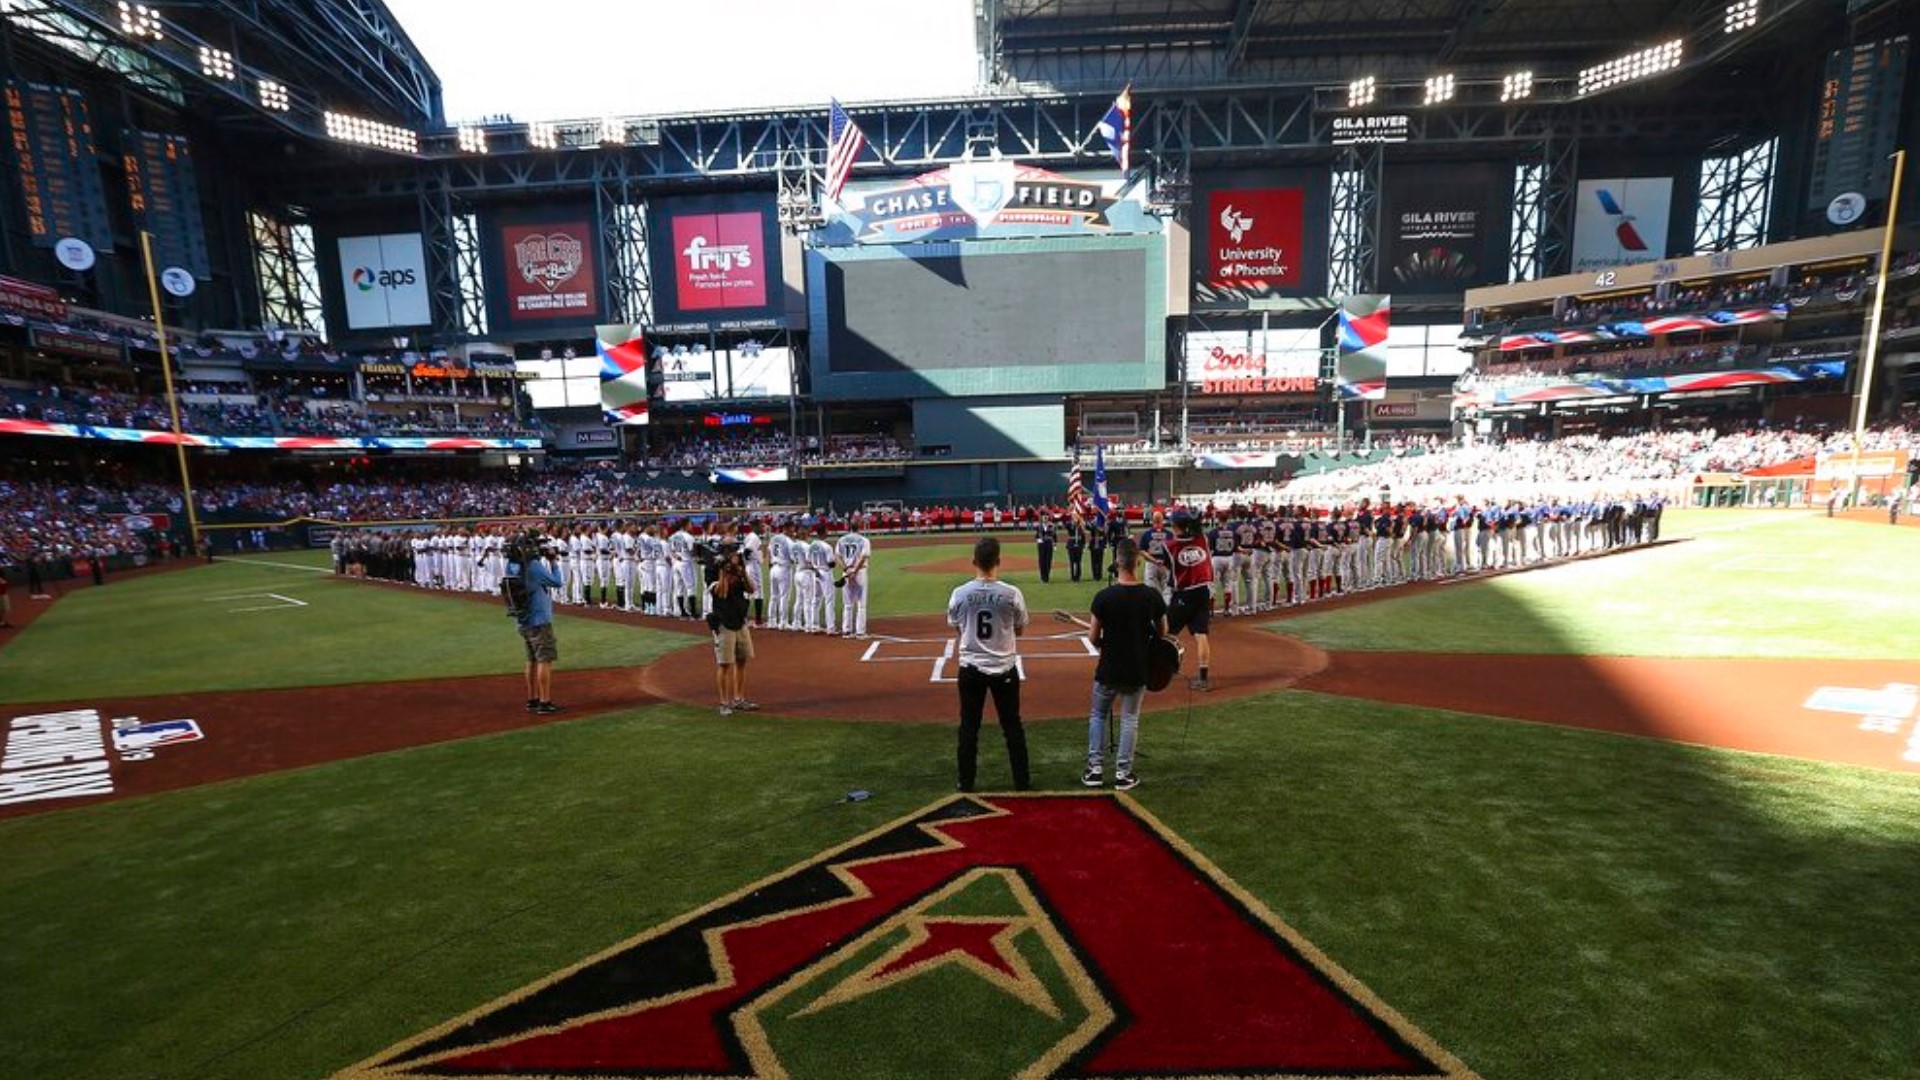 It's Opening Day for the Arizona Diamondbacks! Here's a look at what you can expect this year out at Chase Field.